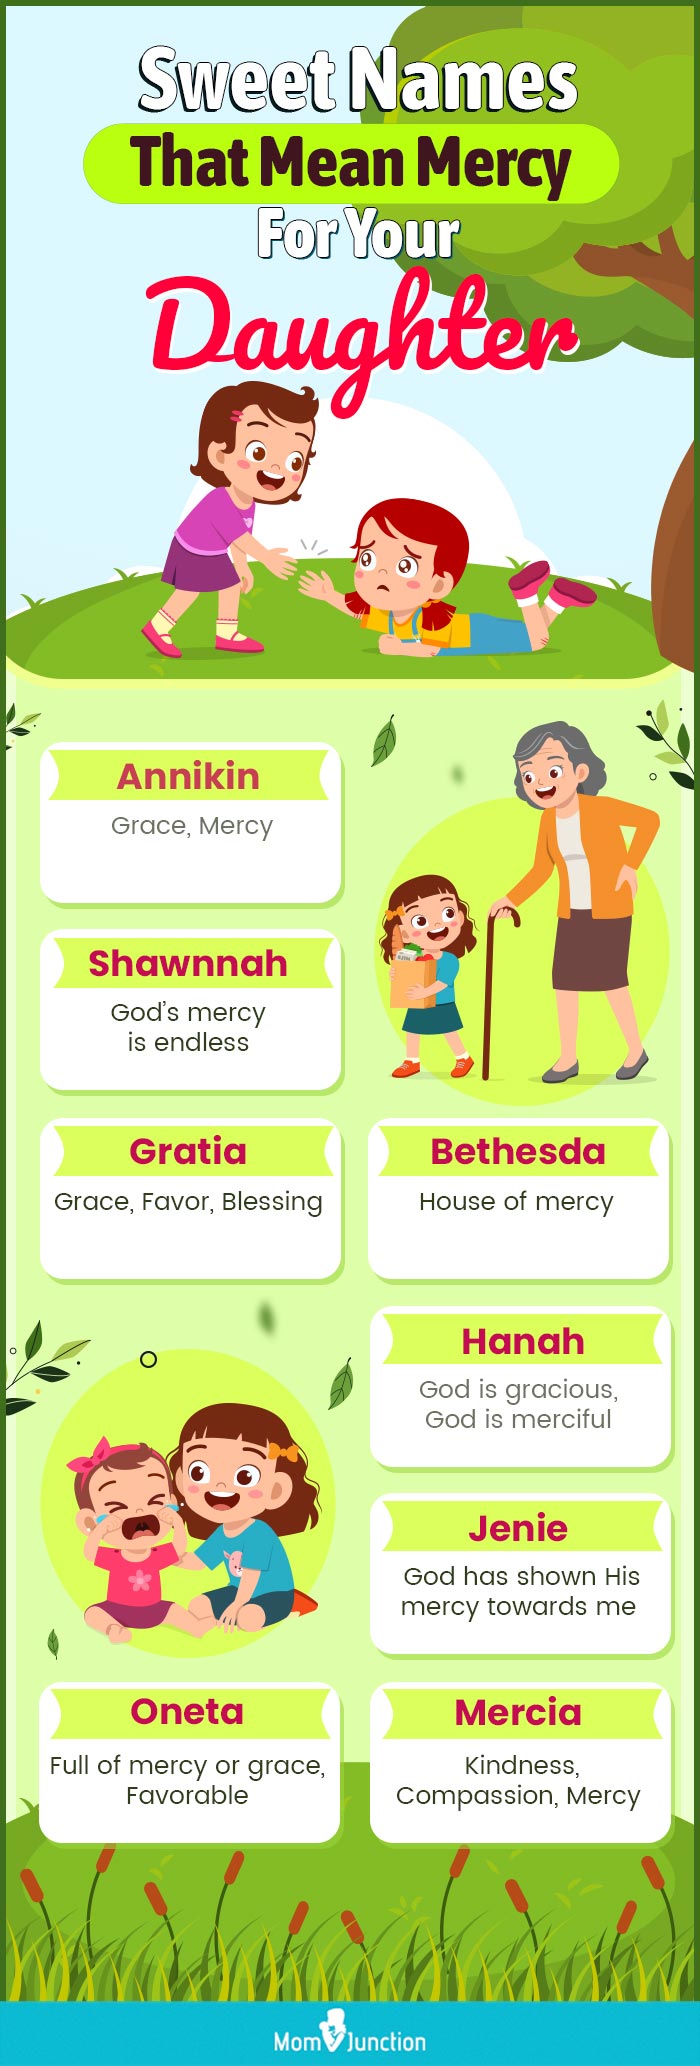 sweet names that mean mercy for your daughter (infographic)